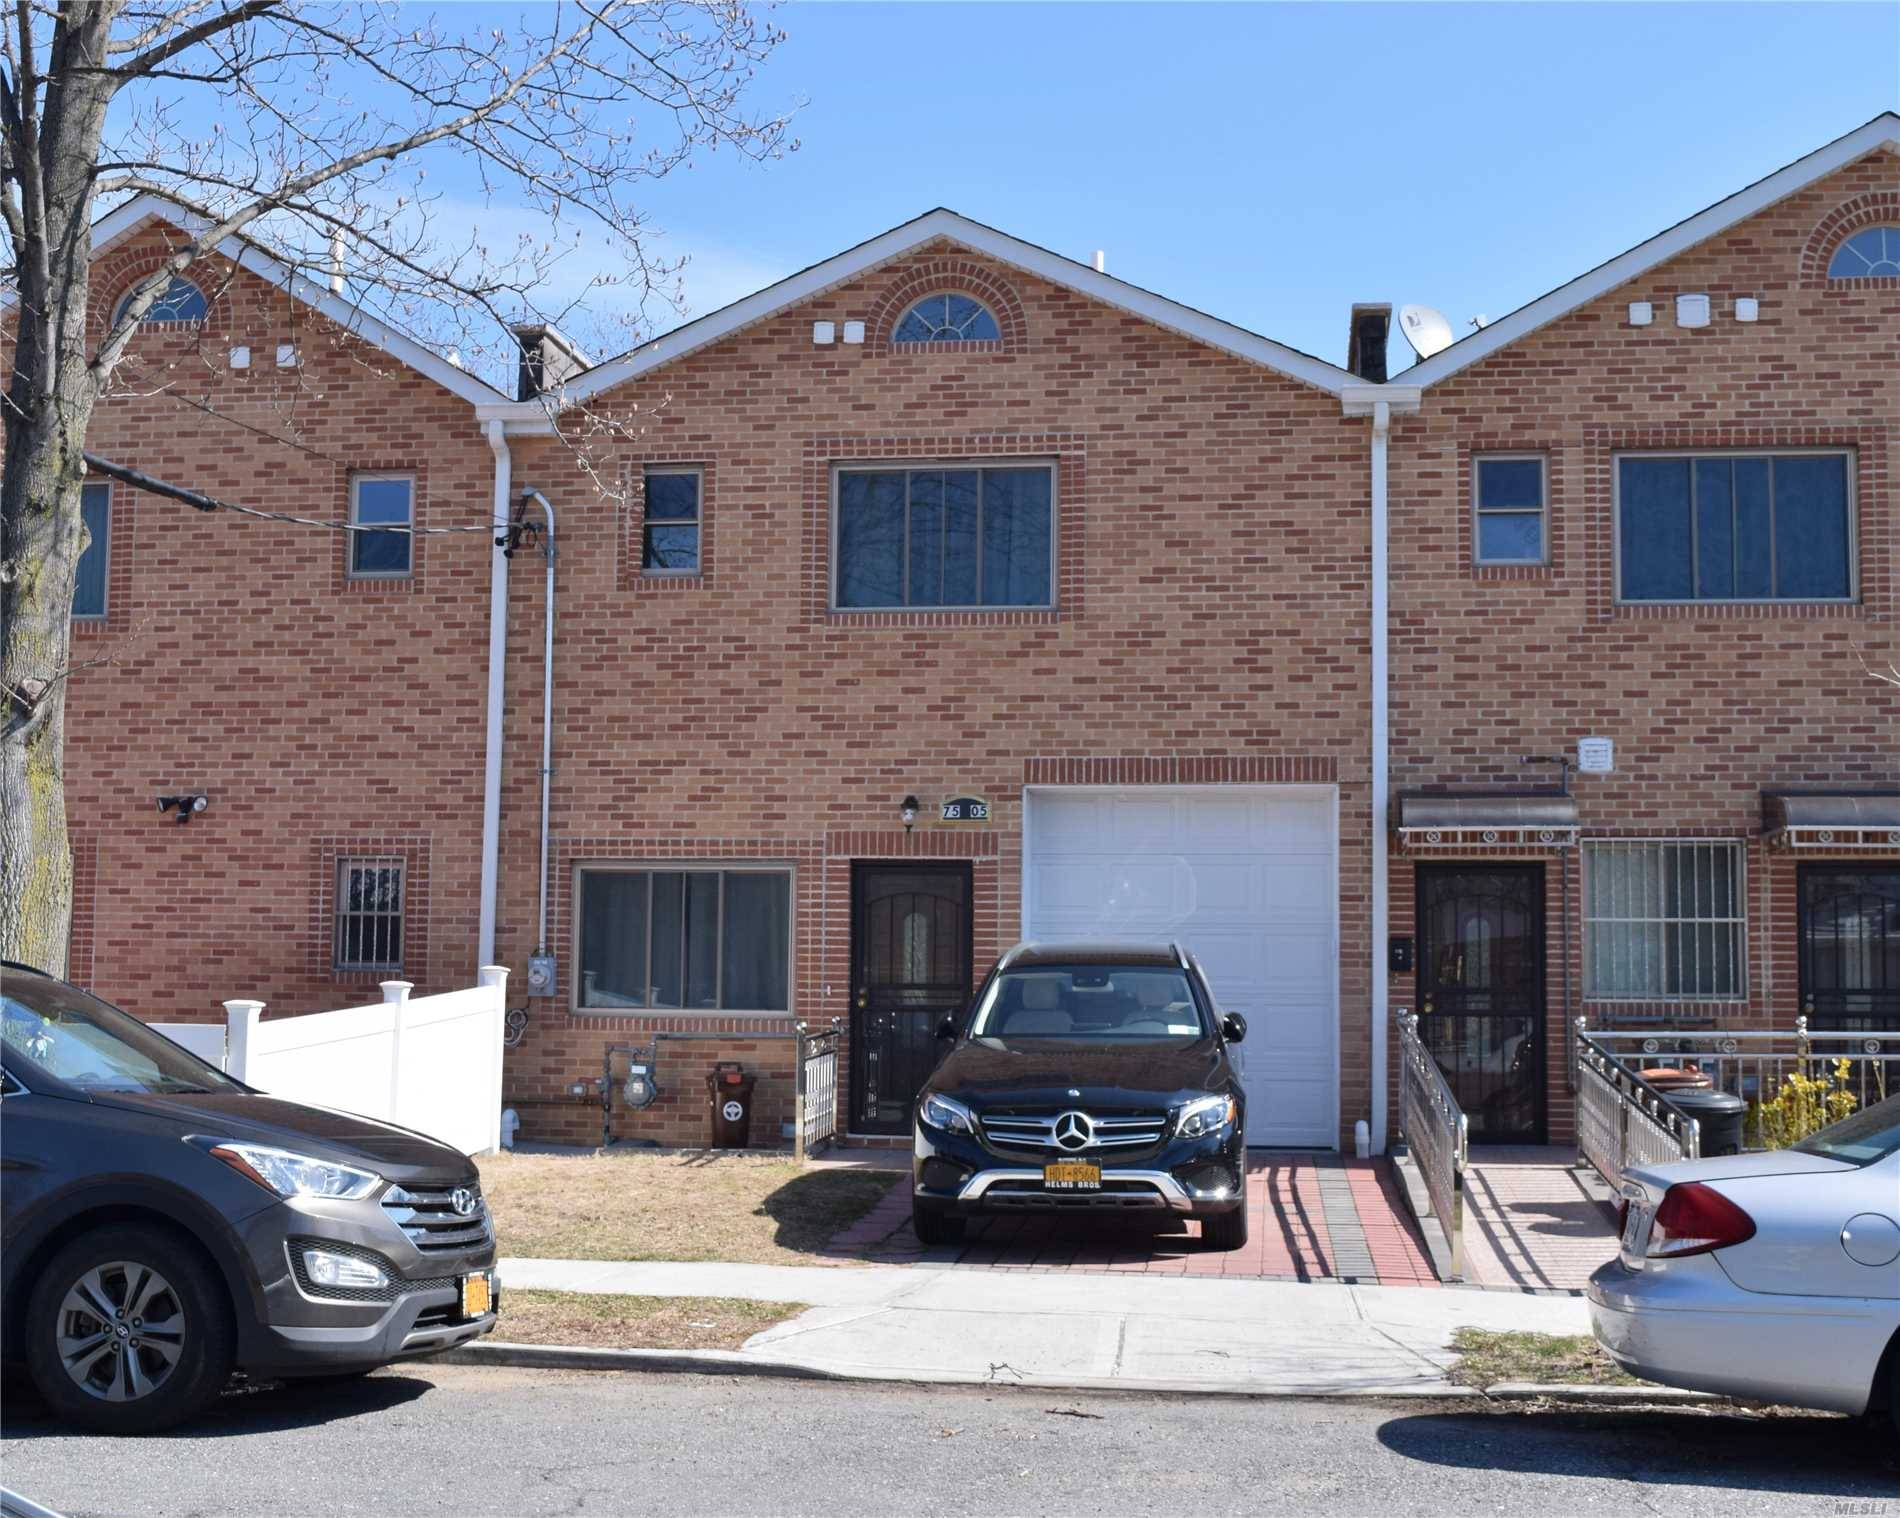 Built 2014 Brick Townhouse With 3 Bedrooms And 3 1/2 Baths.